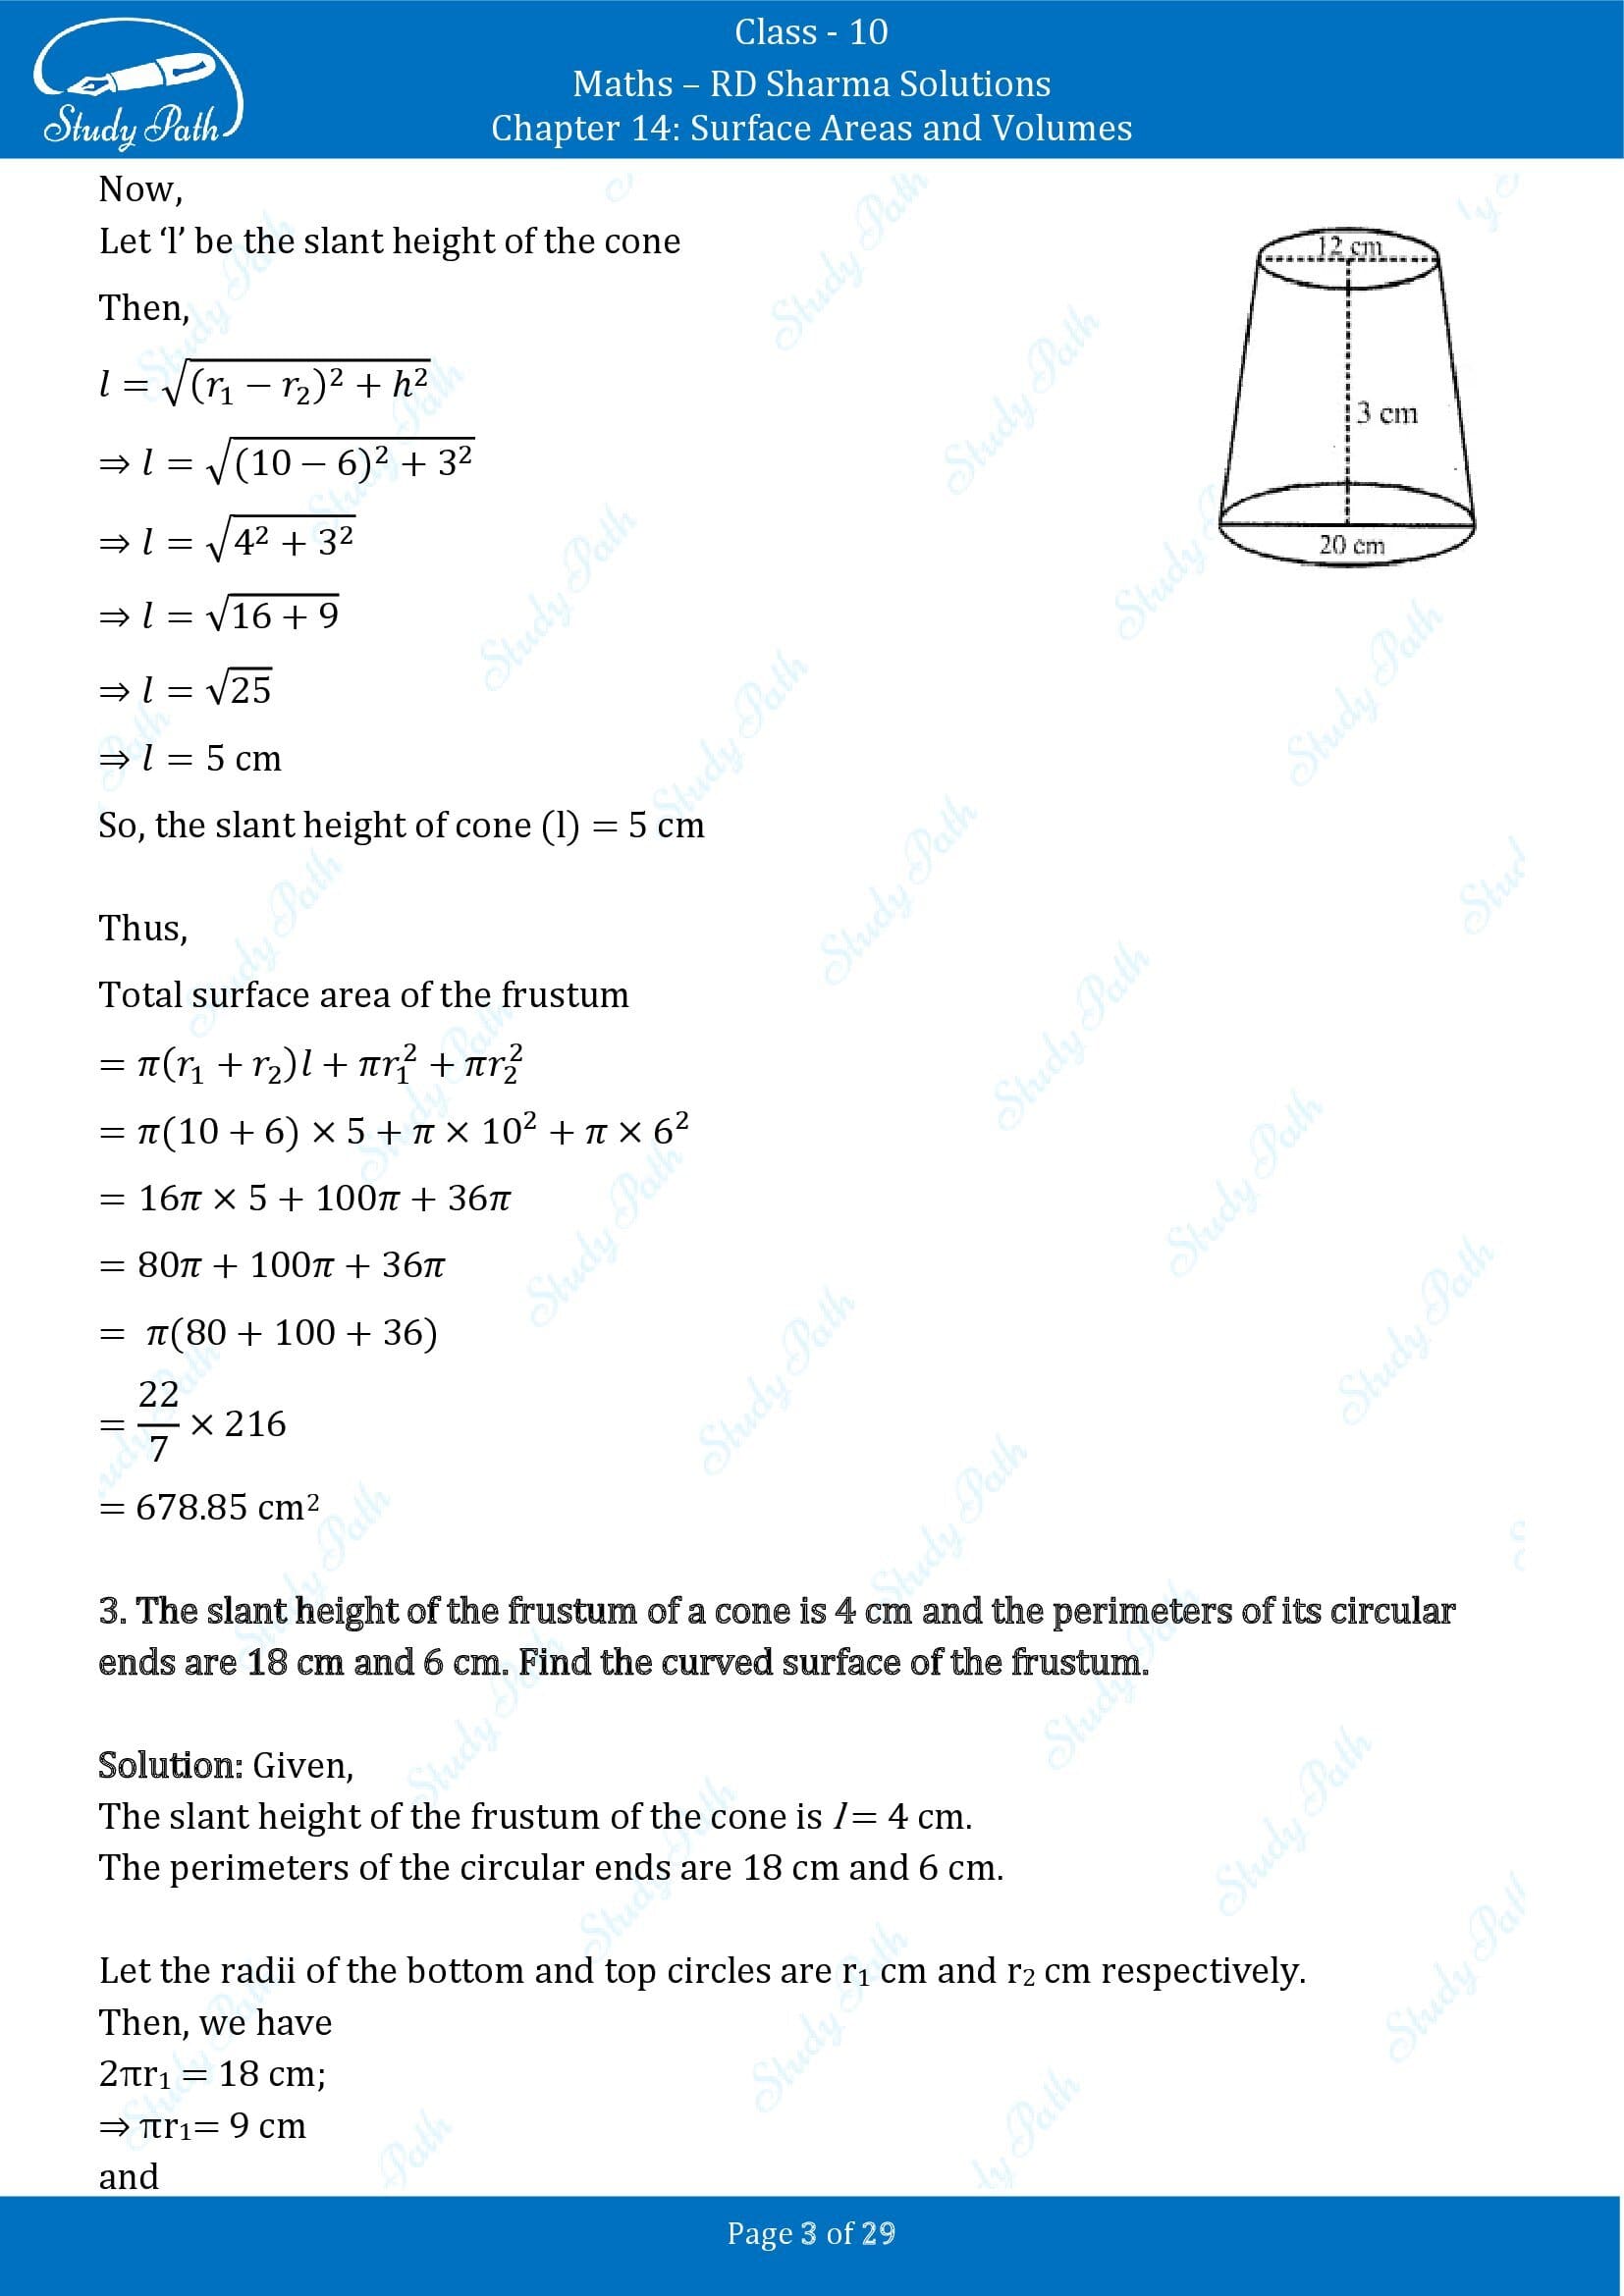 RD Sharma Solutions Class 10 Chapter 14 Surface Areas and Volumes Exercise 14.3 00003